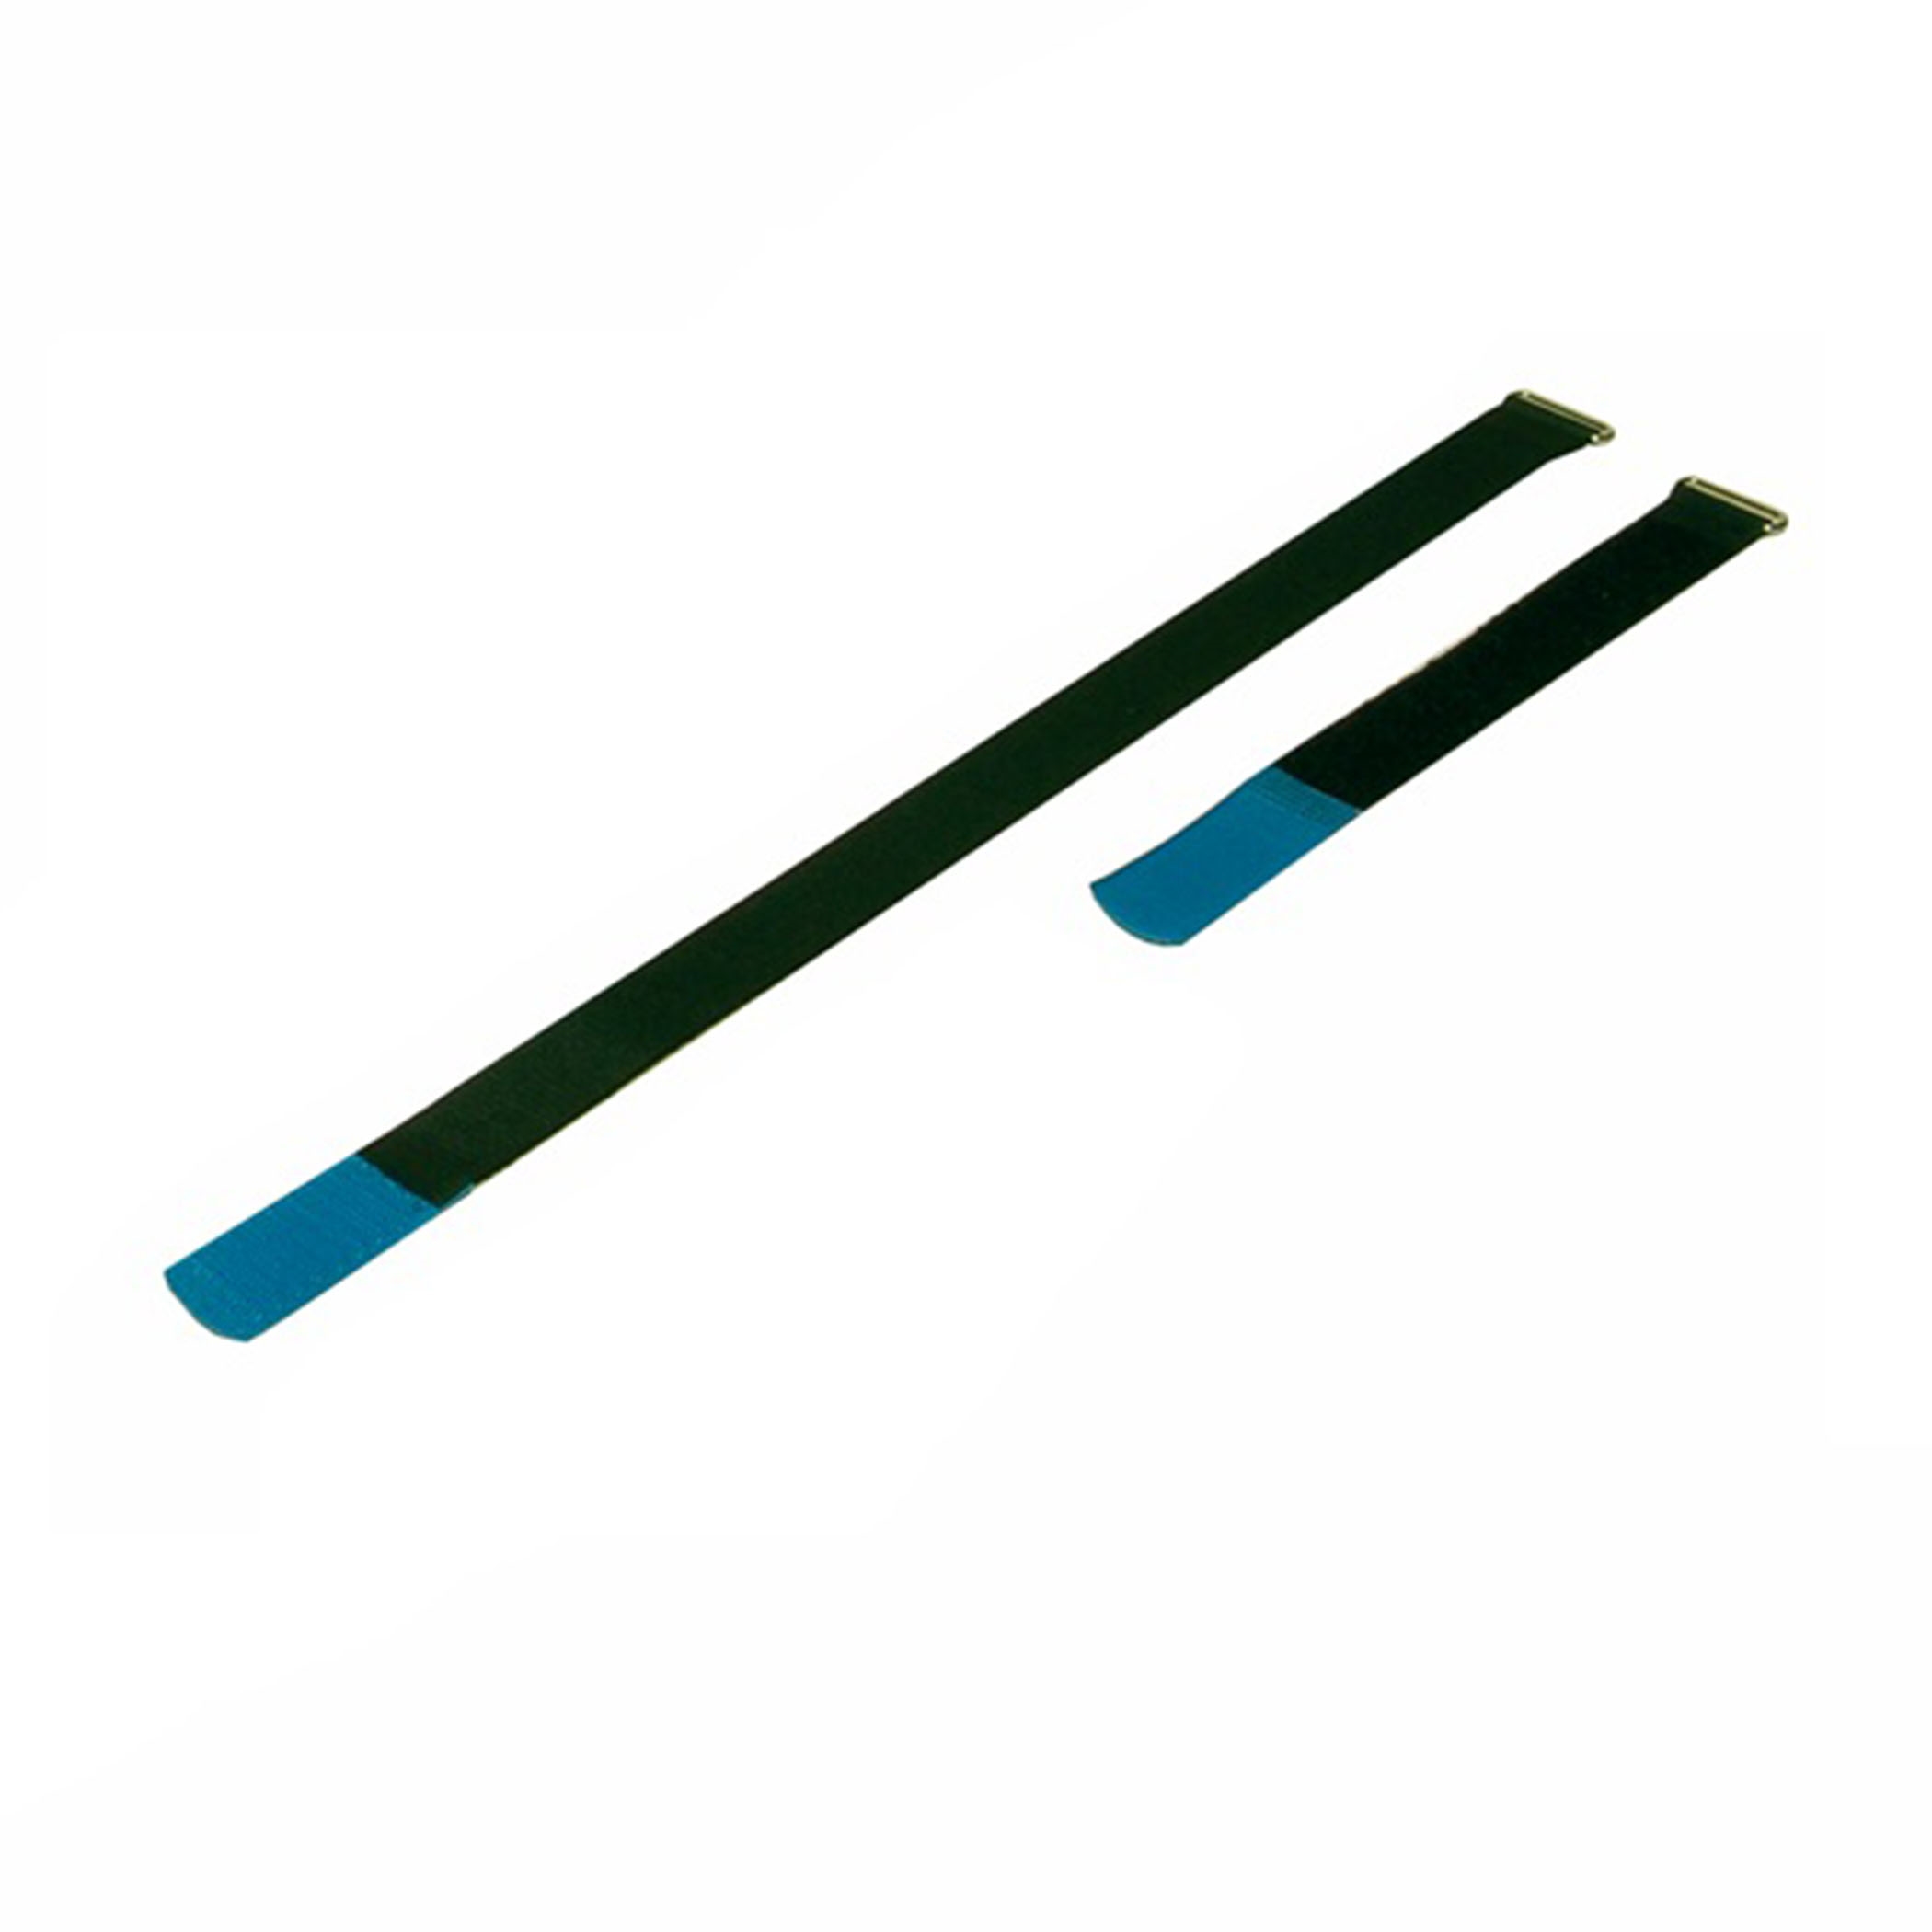 Cable Tie 170x25mm with Hook Blue, (10 pieces) - a2517h